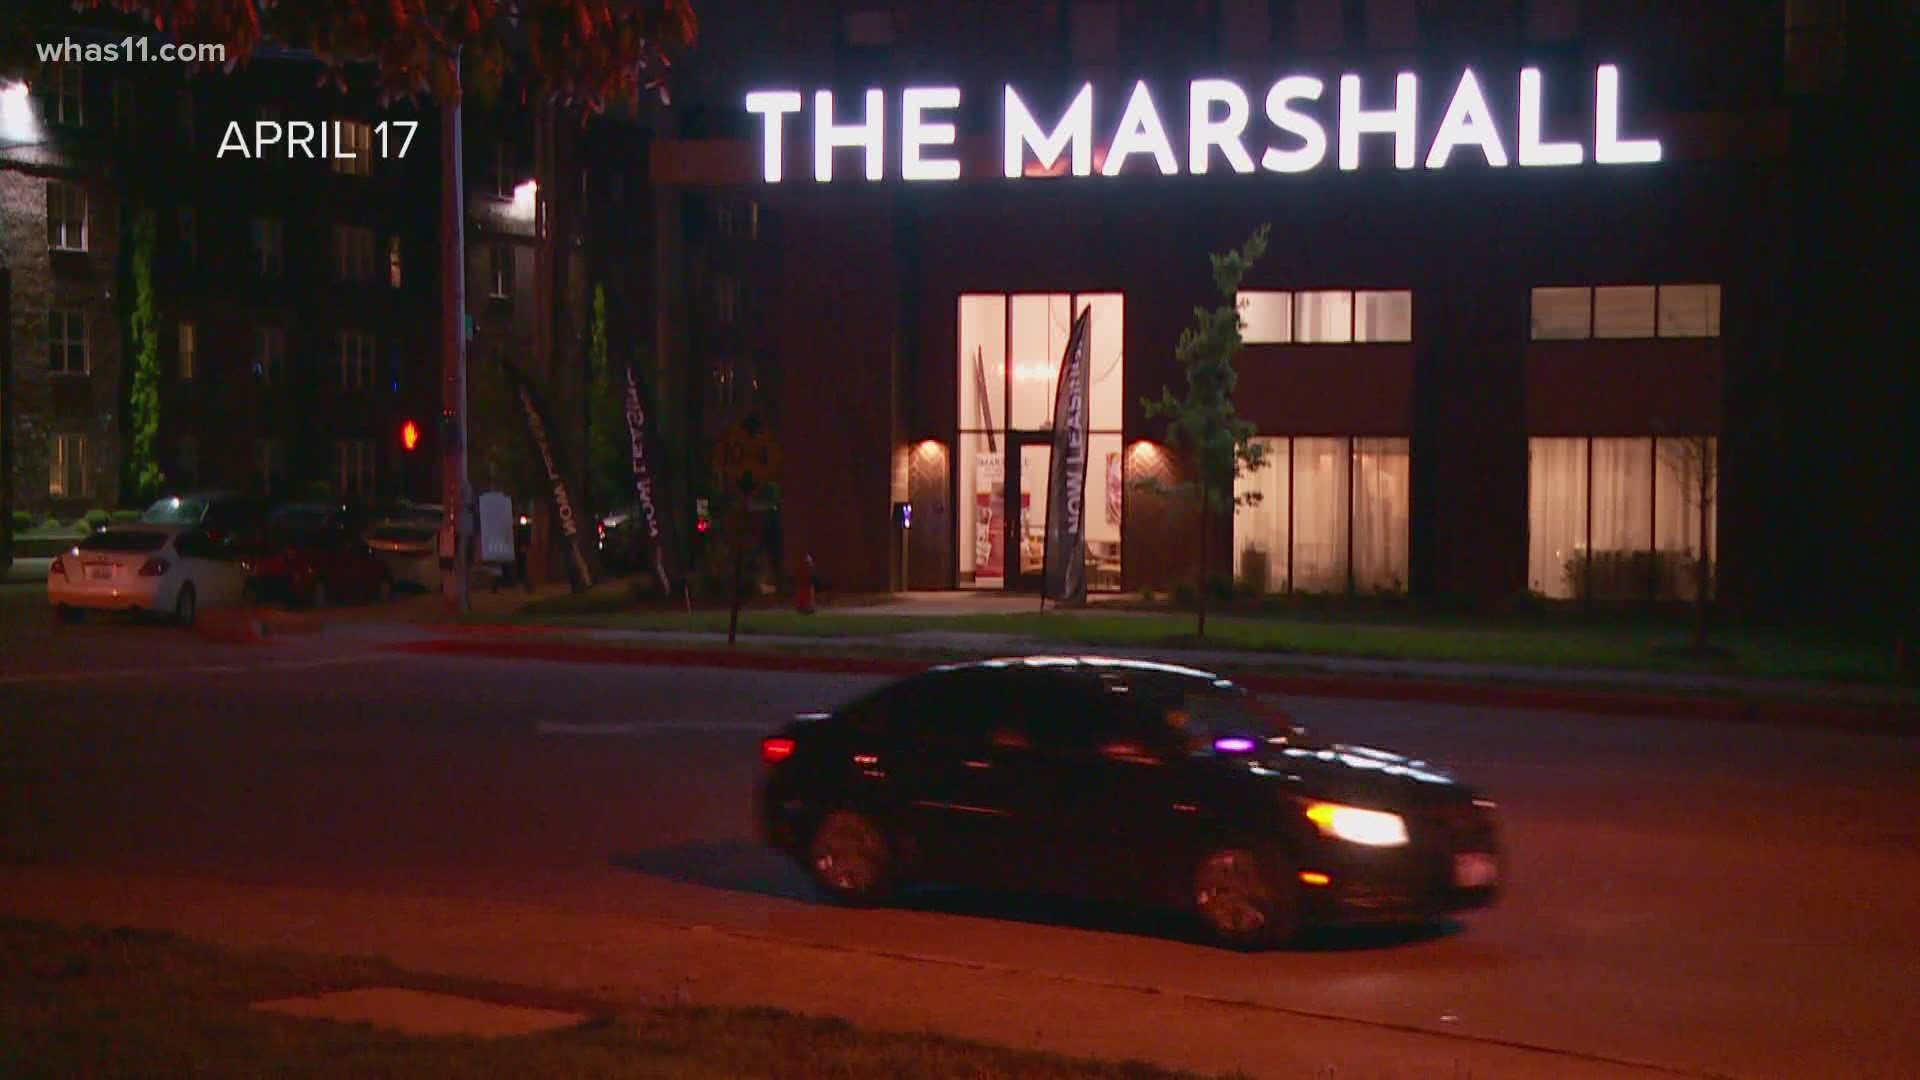 Some students who live in the Marshall near UofL say building management isn't taking safety concerns seriously amid violence in the area.